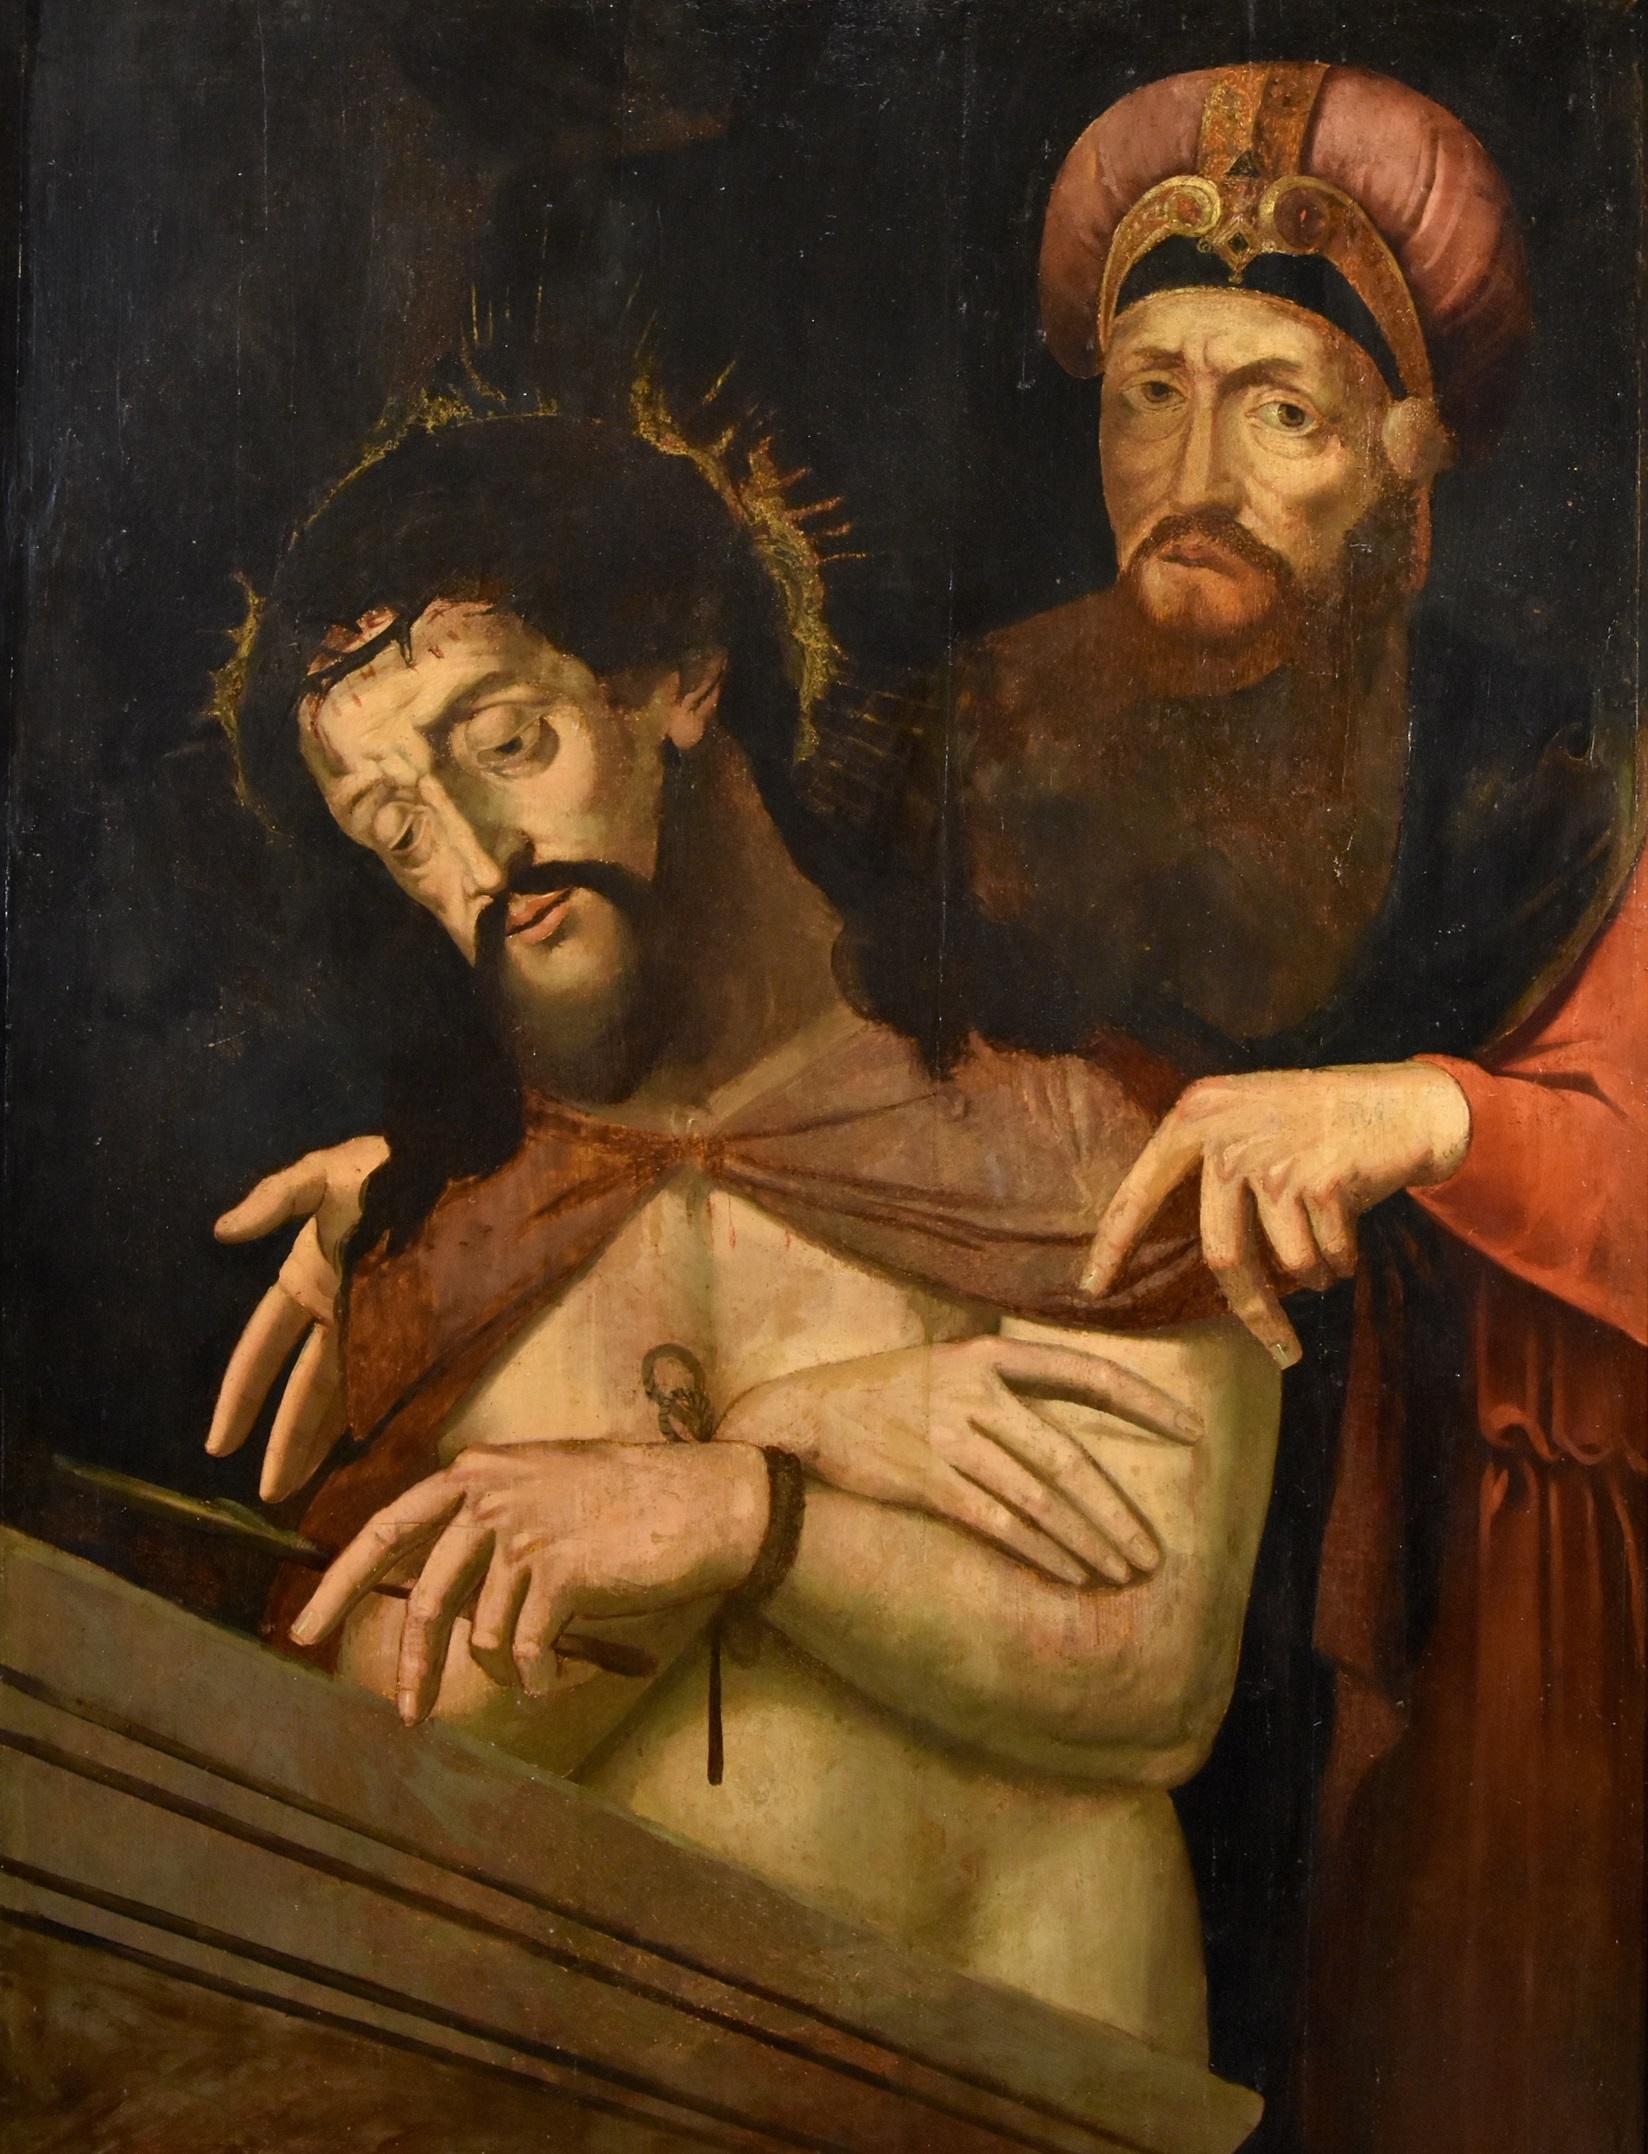 Ecce Homo Coxie Paint 16/17th Century Paint Oil on table Old master Flemish Art - Old Masters Painting by Michael Coxie (malines, 1499 - 1592)